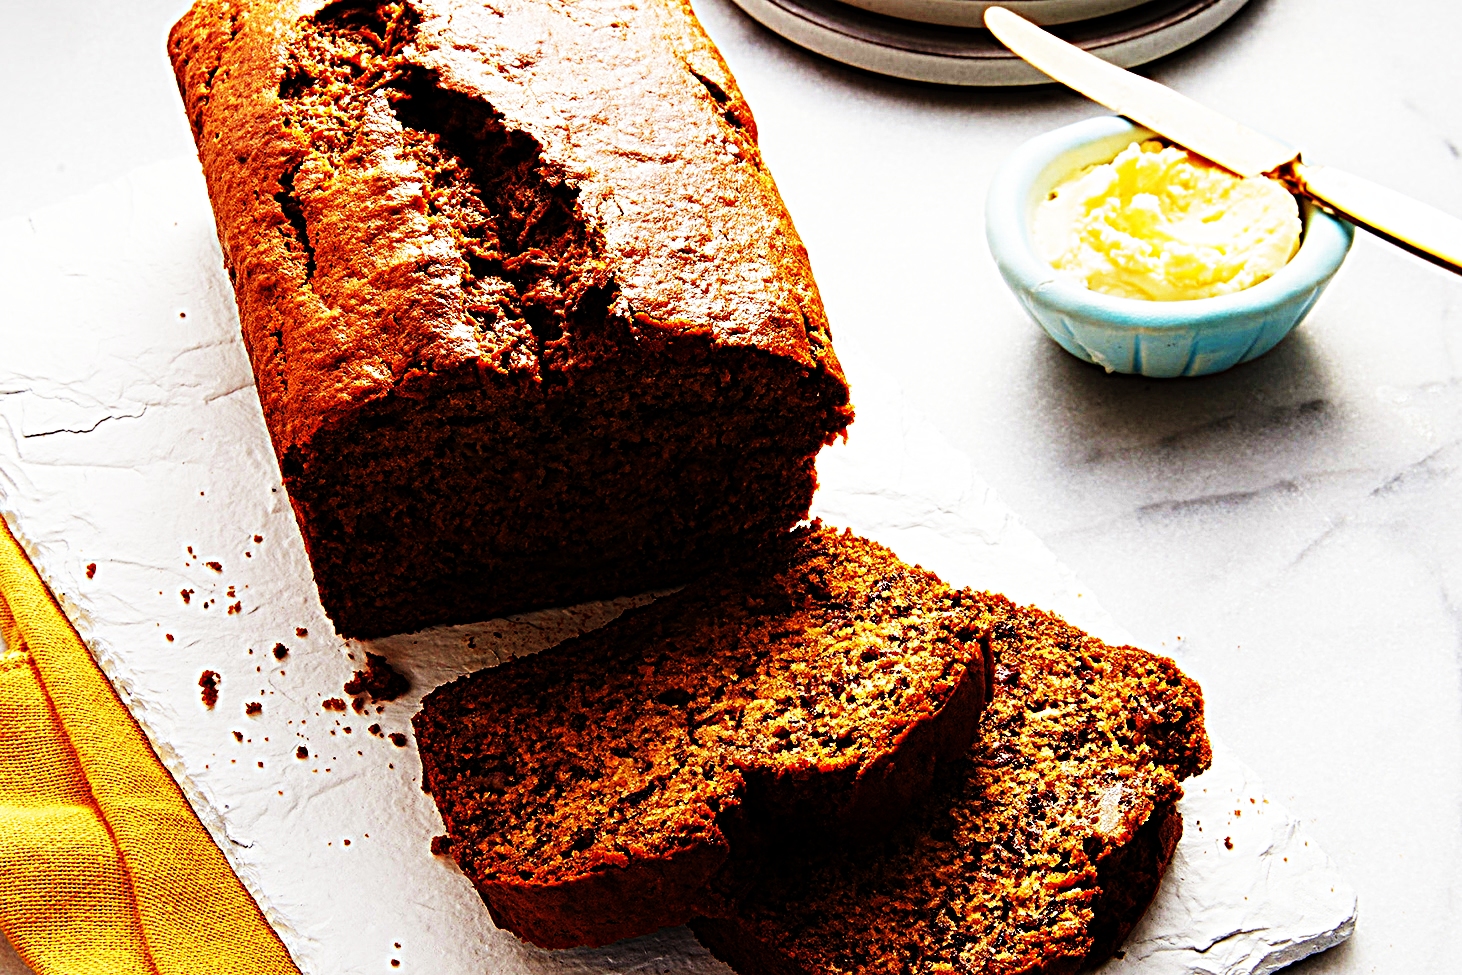 Stupid-Easy Recipe for Vegan Banana Bread (#1 Top-Rated)